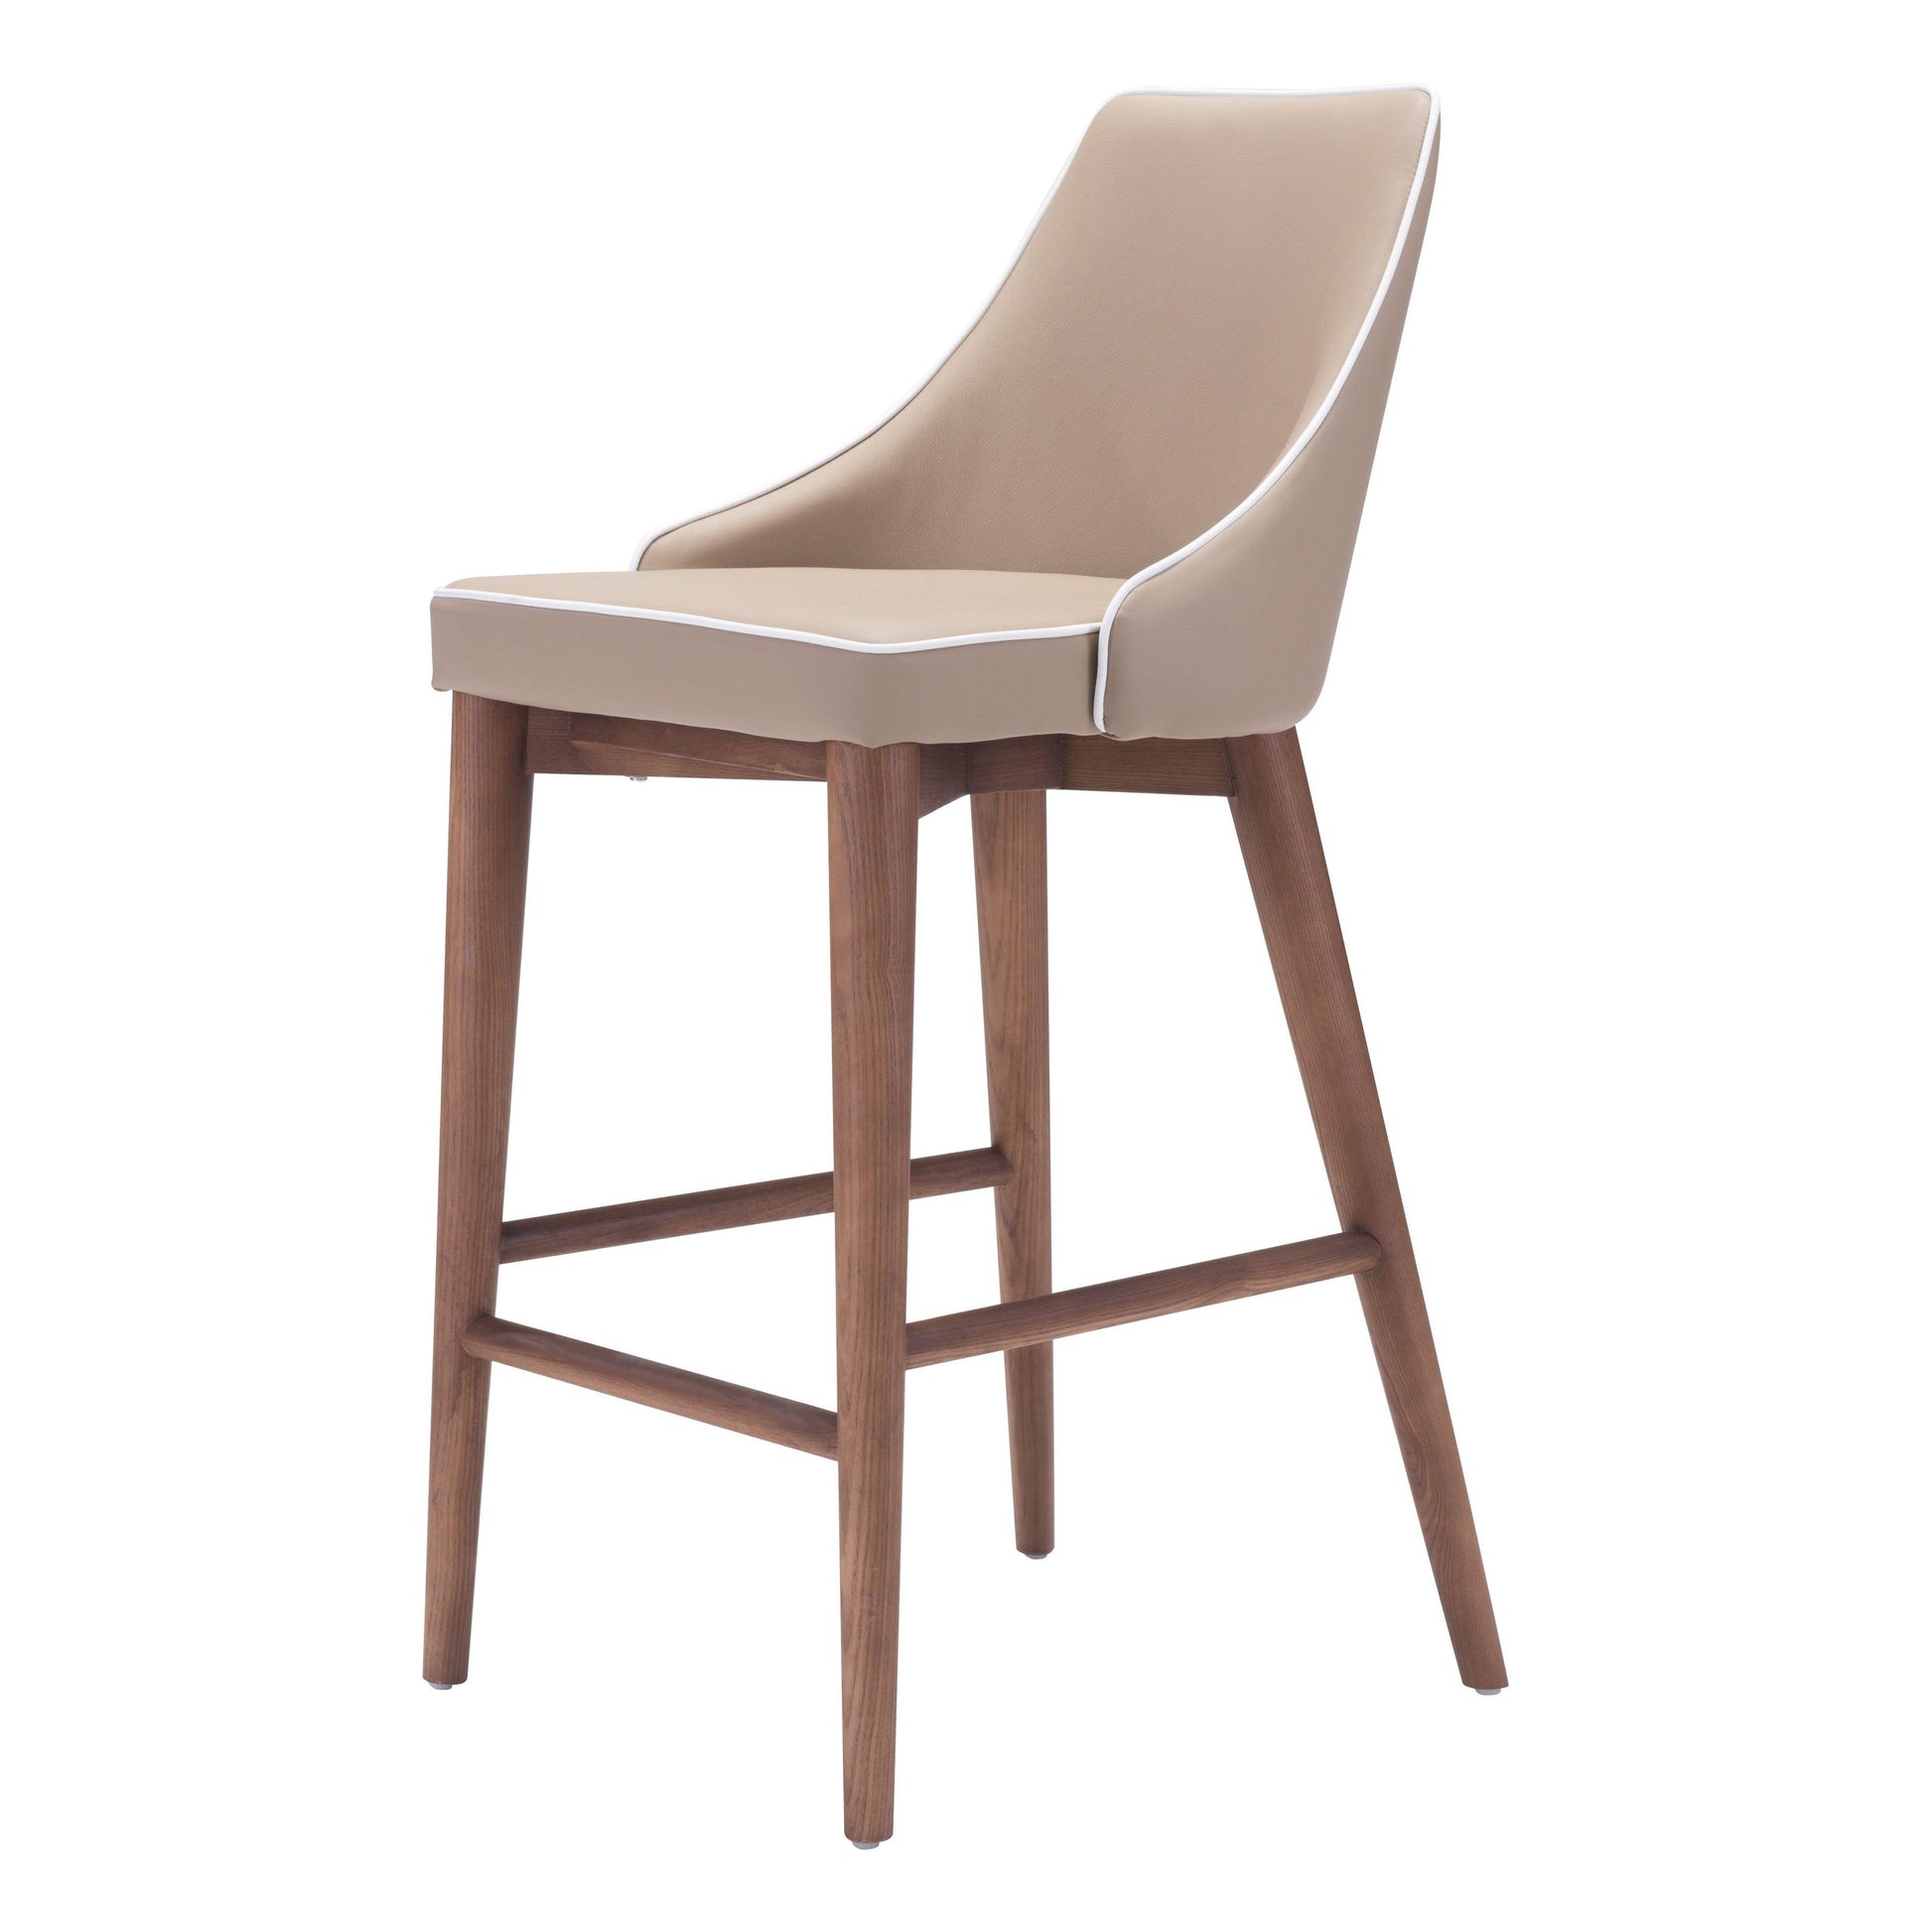 Moor Counter Chair Beige - Sideboards and Things Back Type_With Back, Brand_Zuo Modern, Color_Beige, Color_Brown, Depth_10-20, Height_30-40, Materials_Upholstery, Materials_Wood, Product Type_Counter Height, Upholstery Type_Leather, Upholstery Type_Vegan Leather, Width_10-20, Wood Species_Birch, Wood Species_Plywood